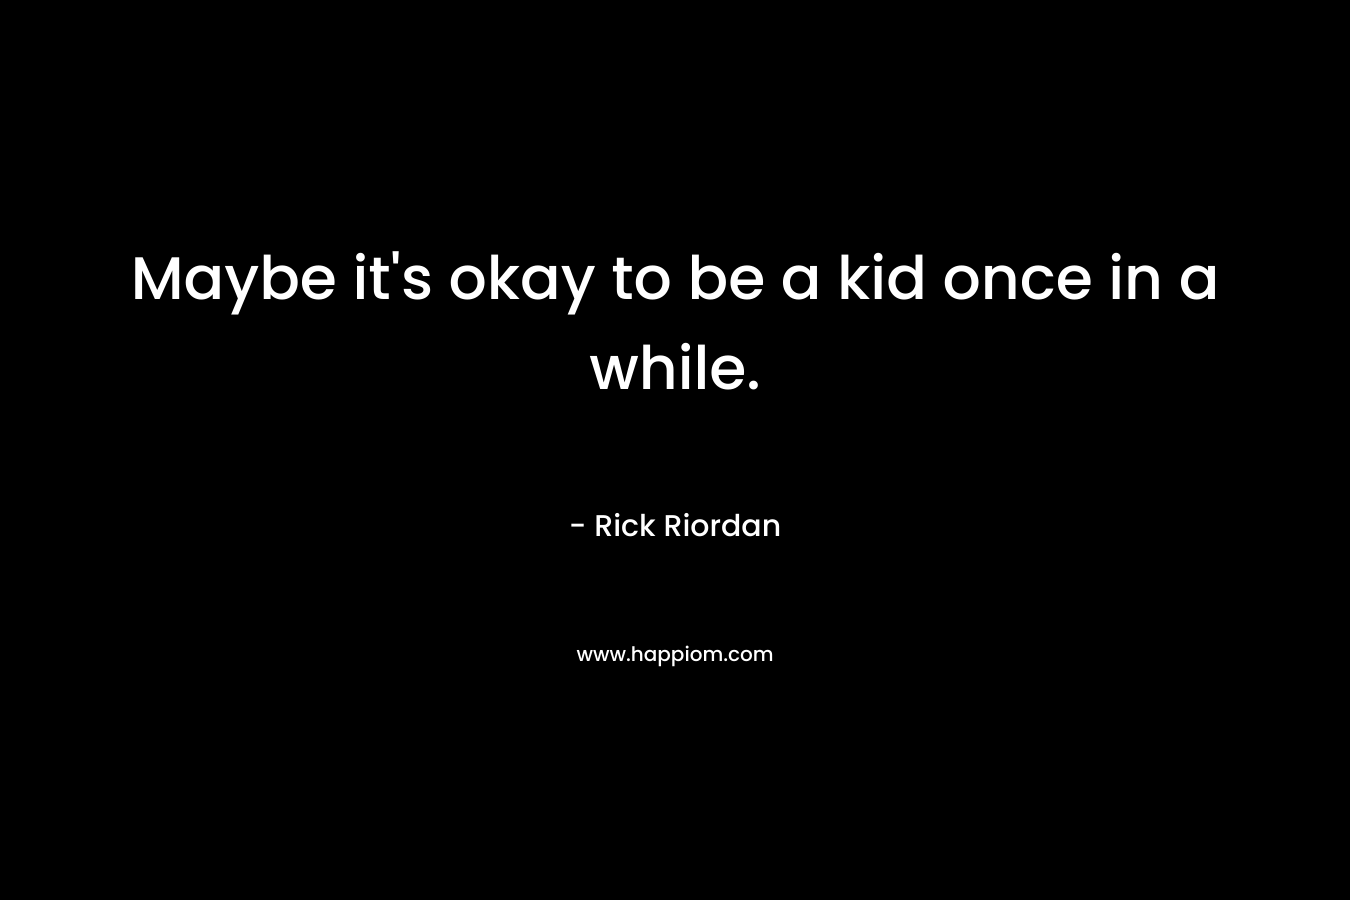 Maybe it’s okay to be a kid once in a while. – Rick Riordan